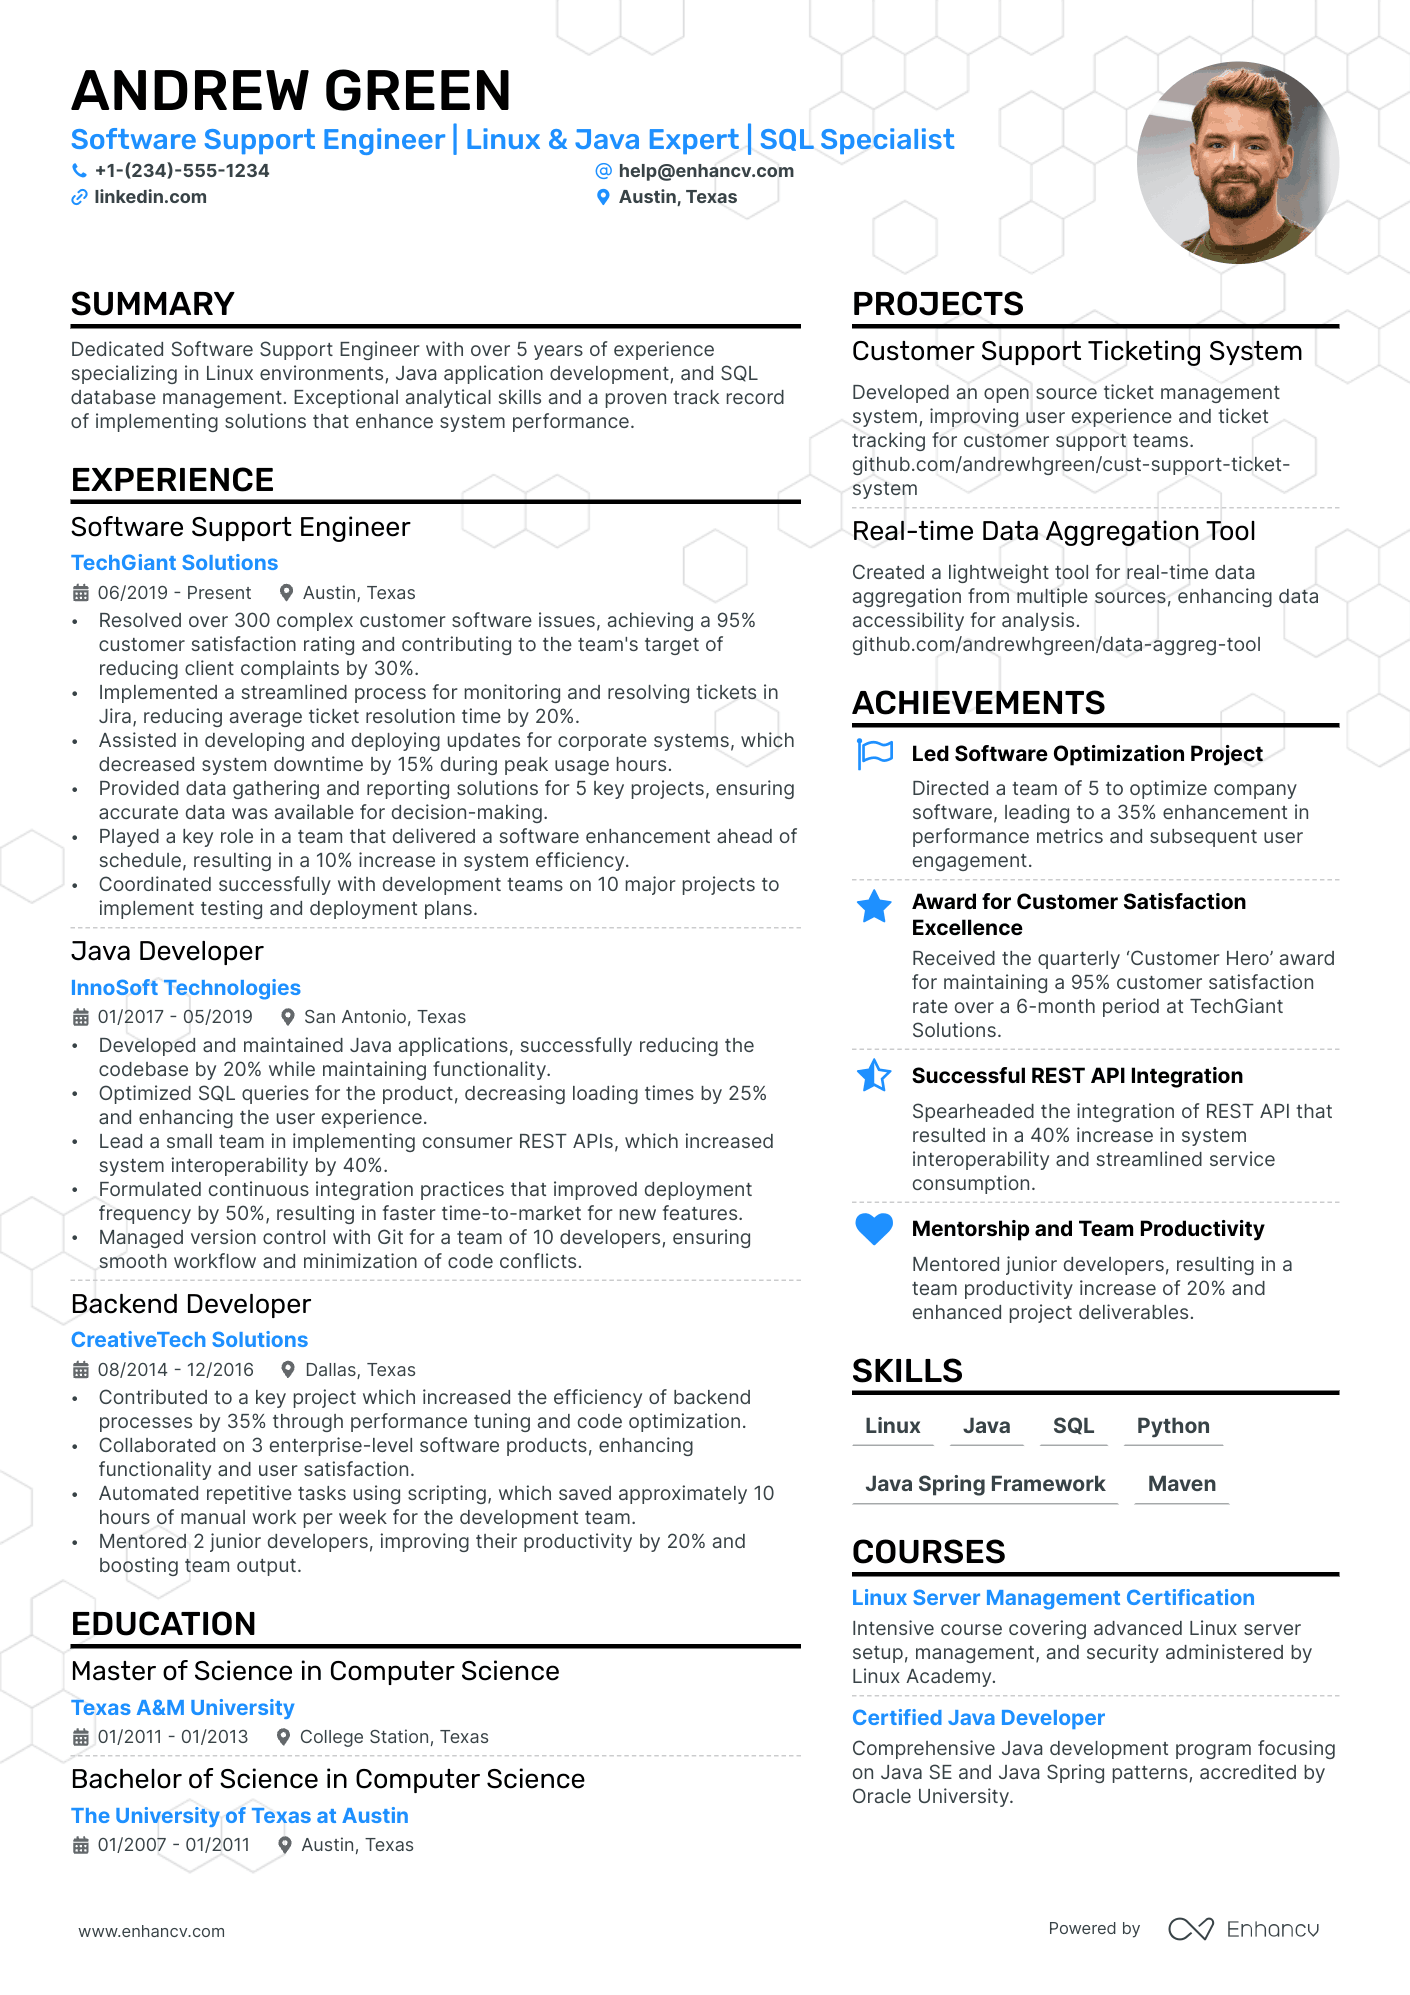 Software Support Engineer resume example